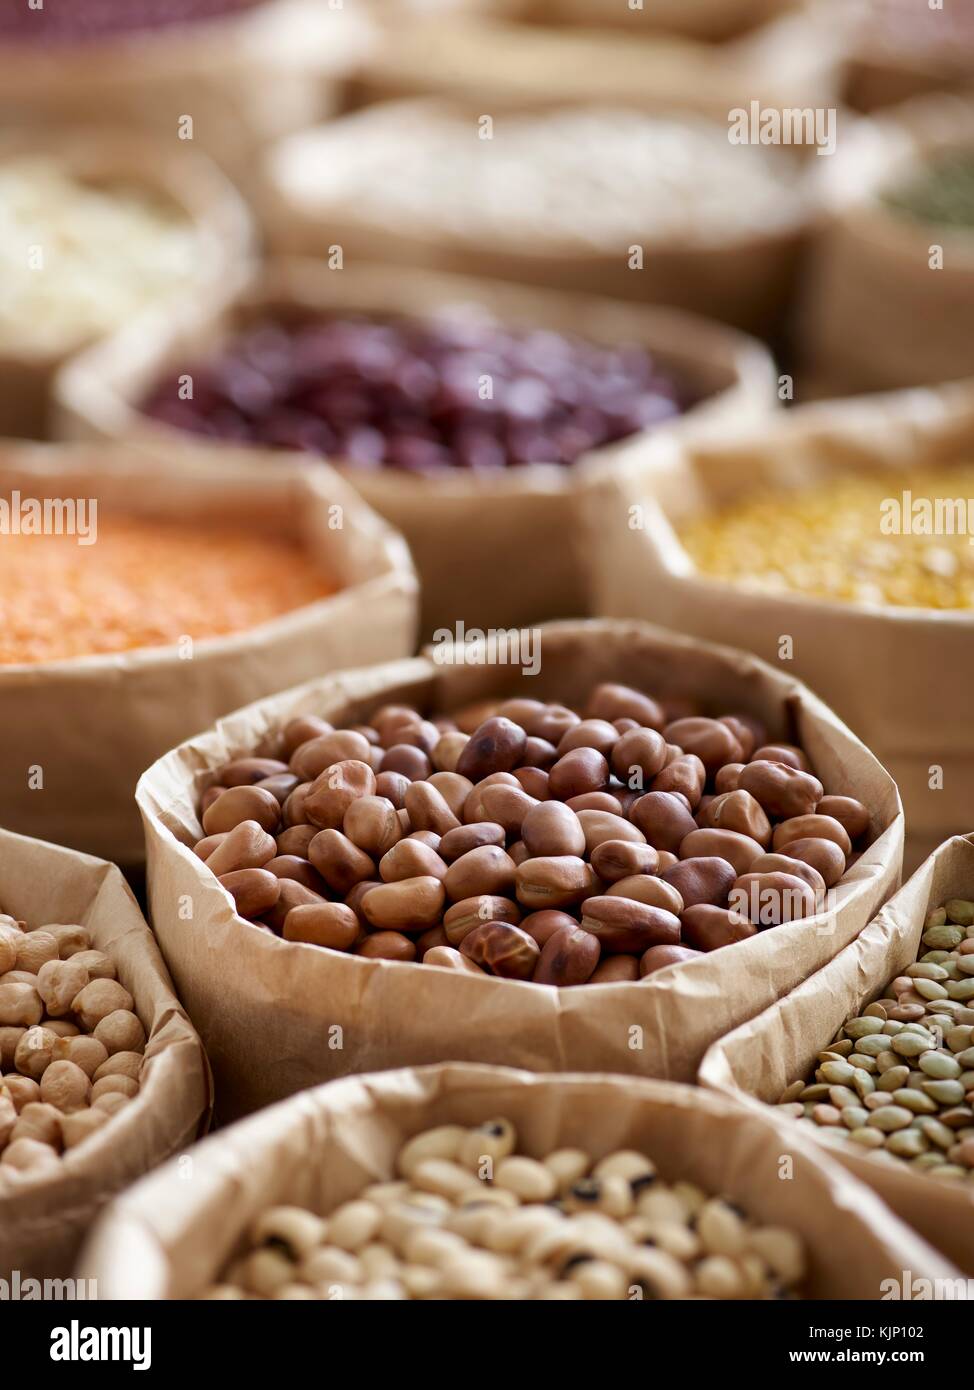 Pulses in paper bags. Stock Photo